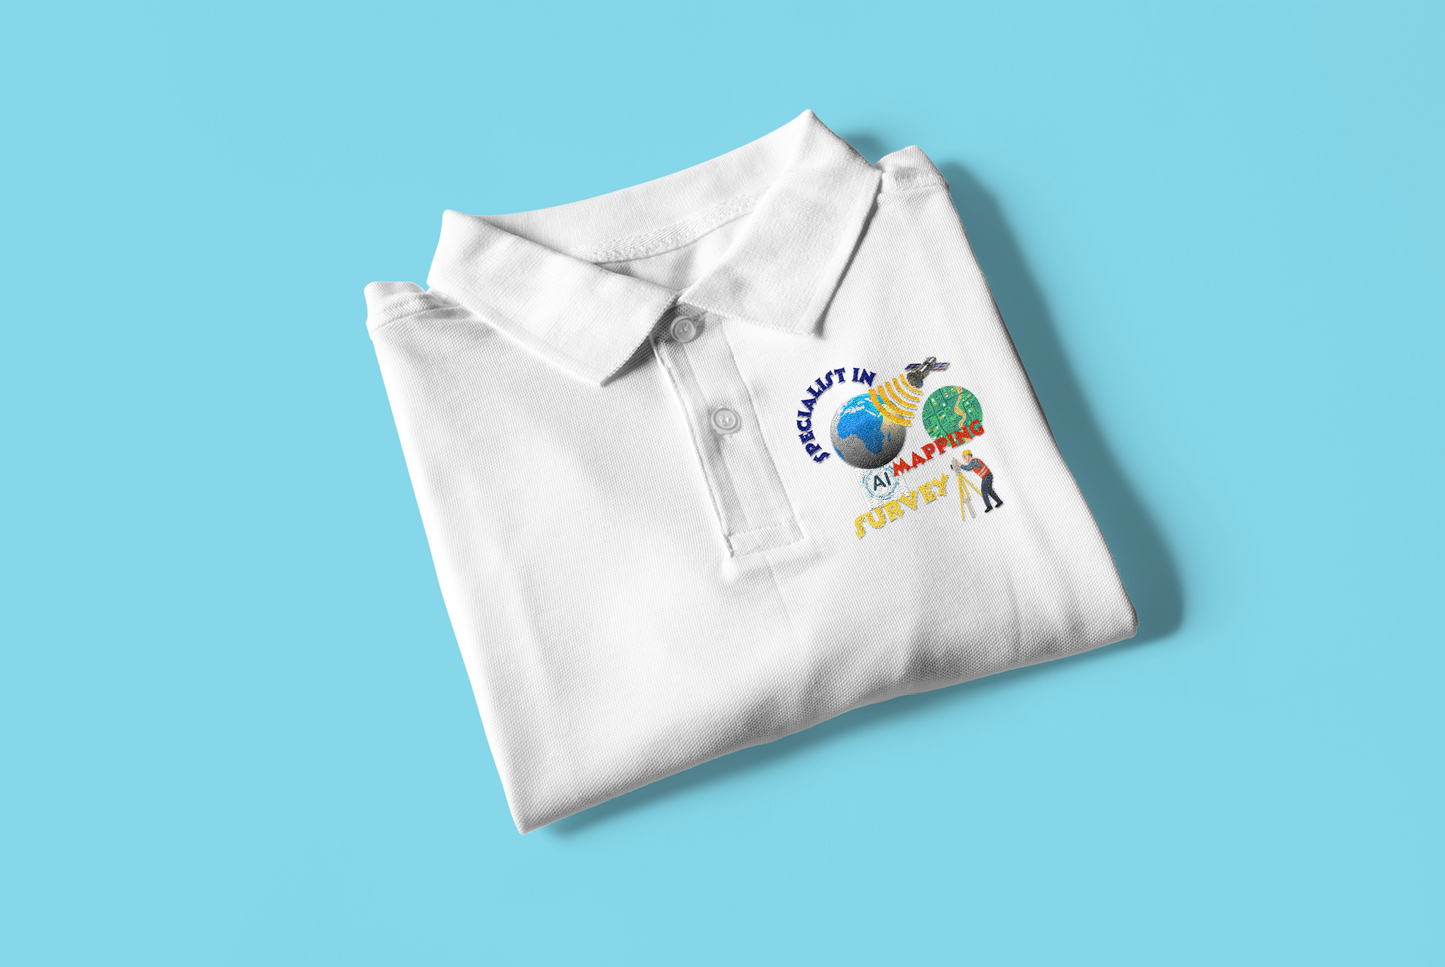 SPECIALIST IN MAPPING POLO T SHIRT